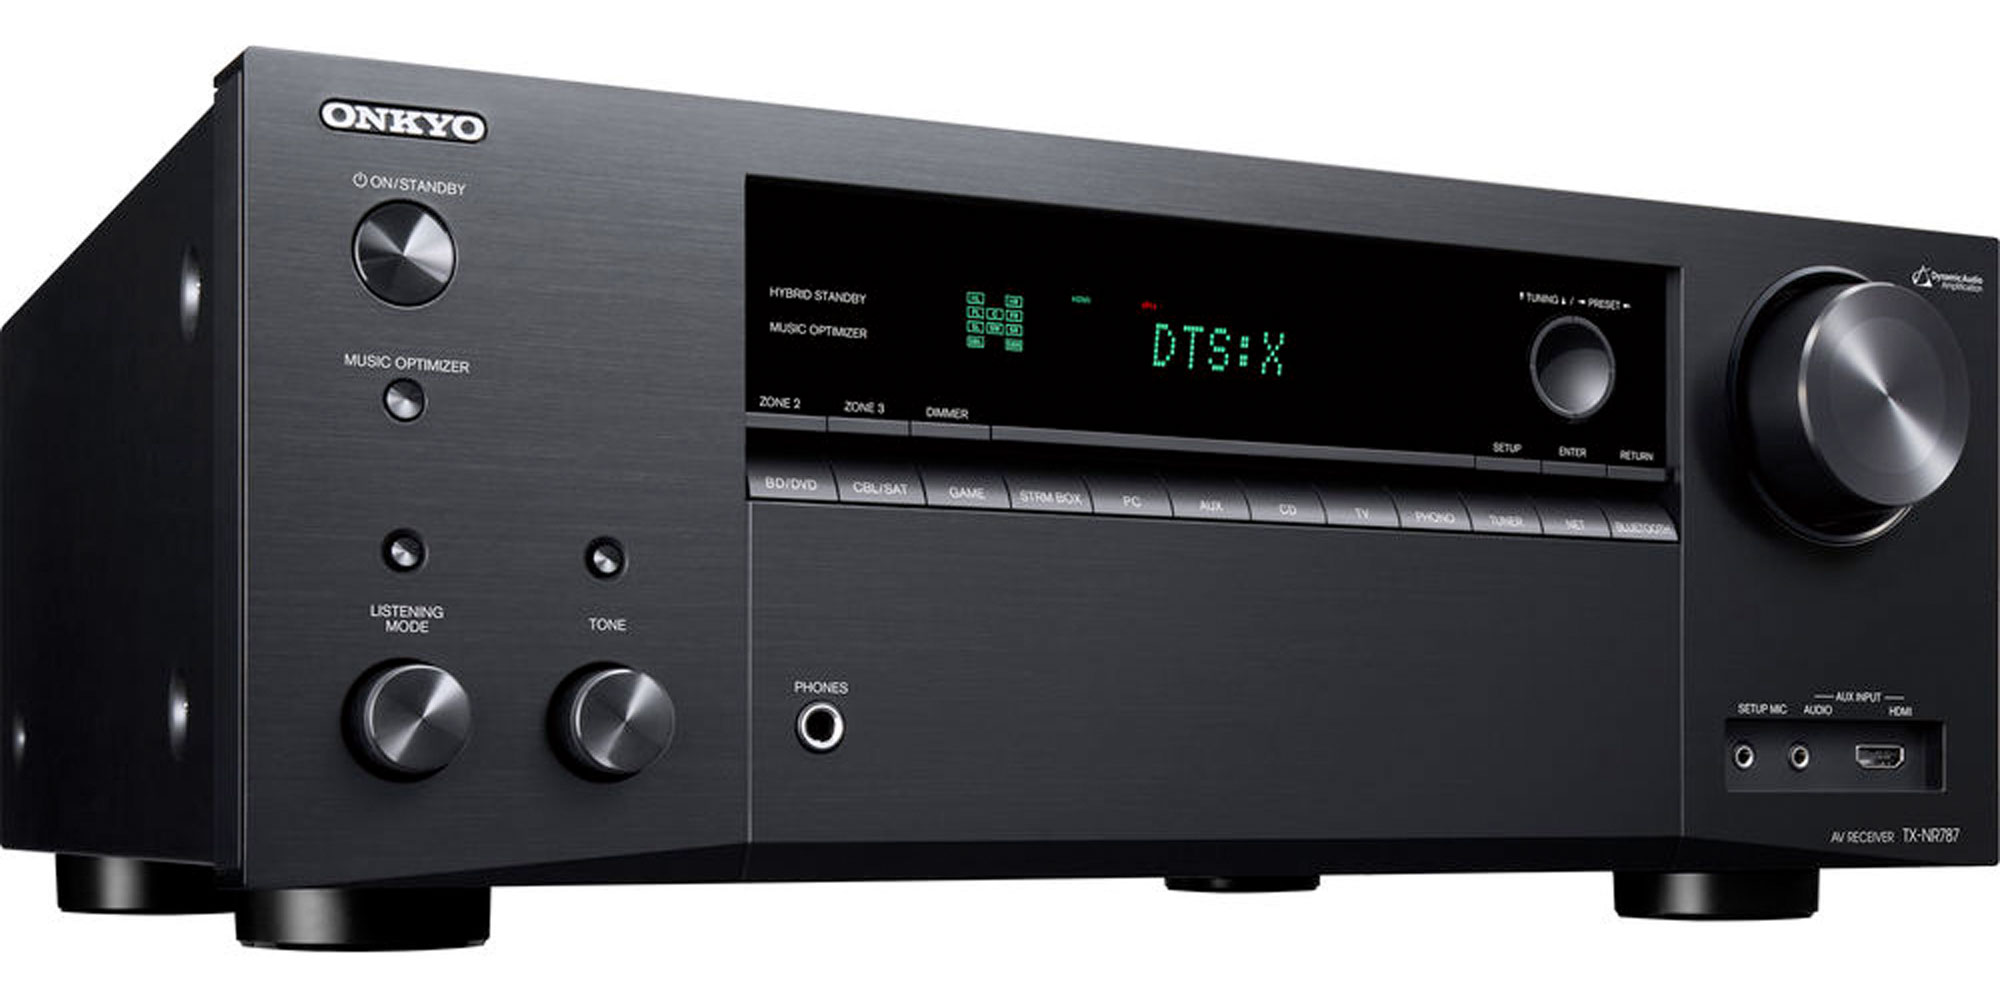 Onkyo's 9.2Ch. 4K HDR receiver offers Dolby Atmos, AirPlay, & more for